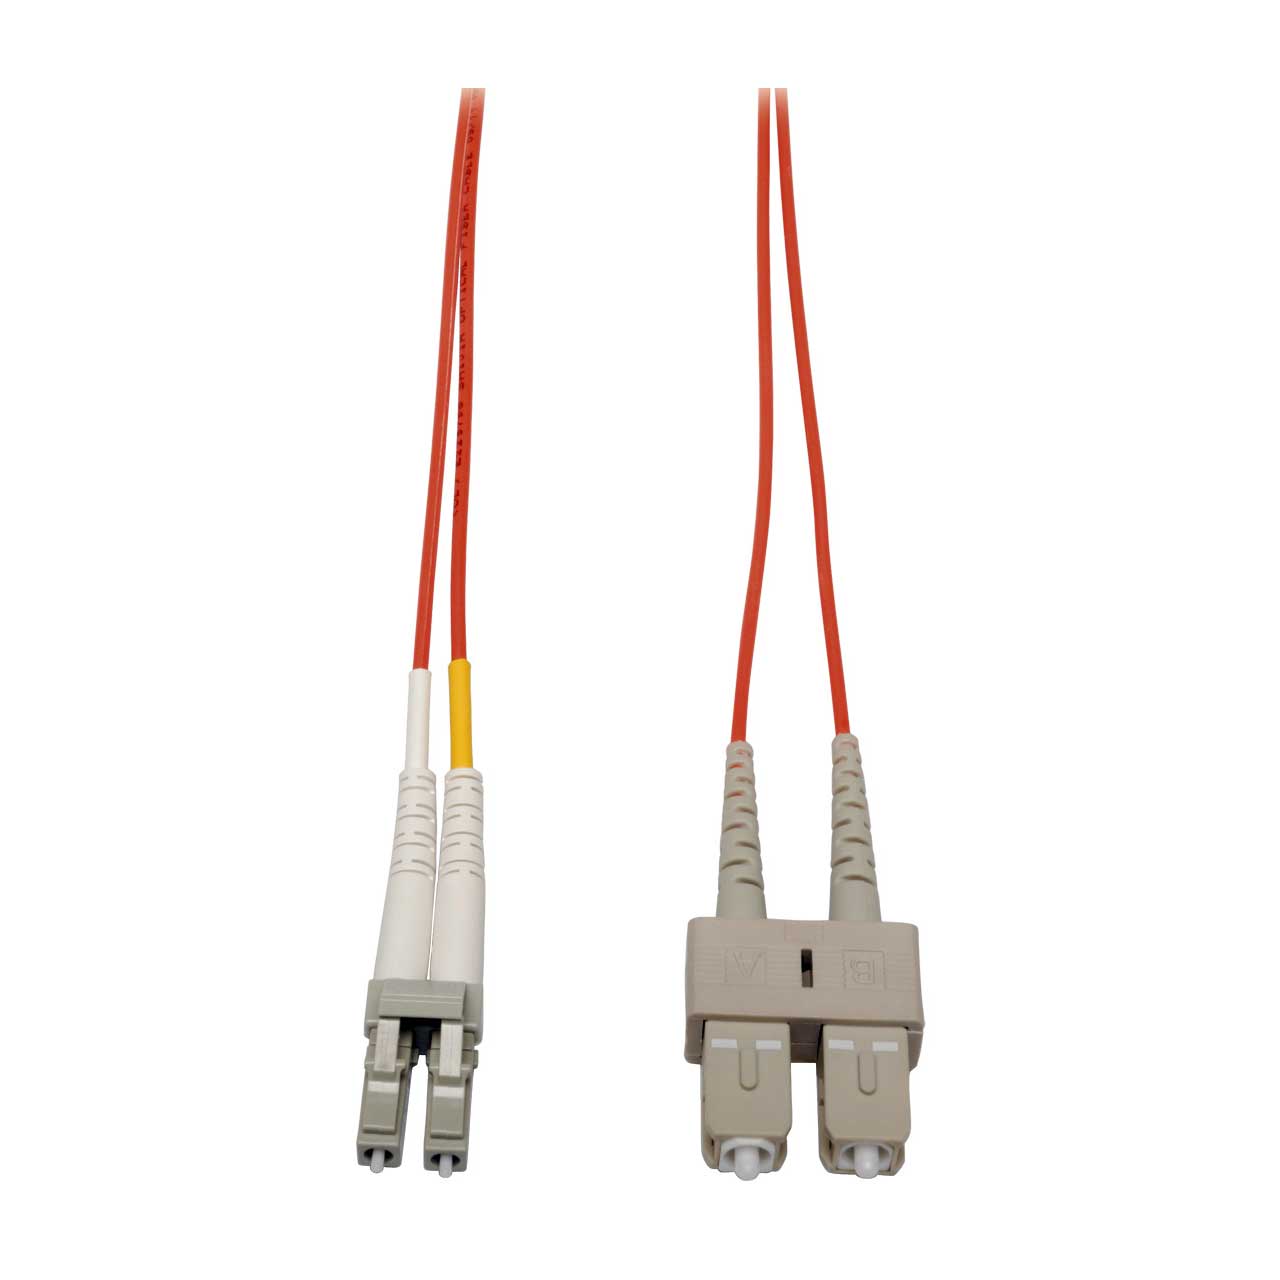 30 Meter LC to SC Cable, Multimode Duplex OM1 Patch Cord